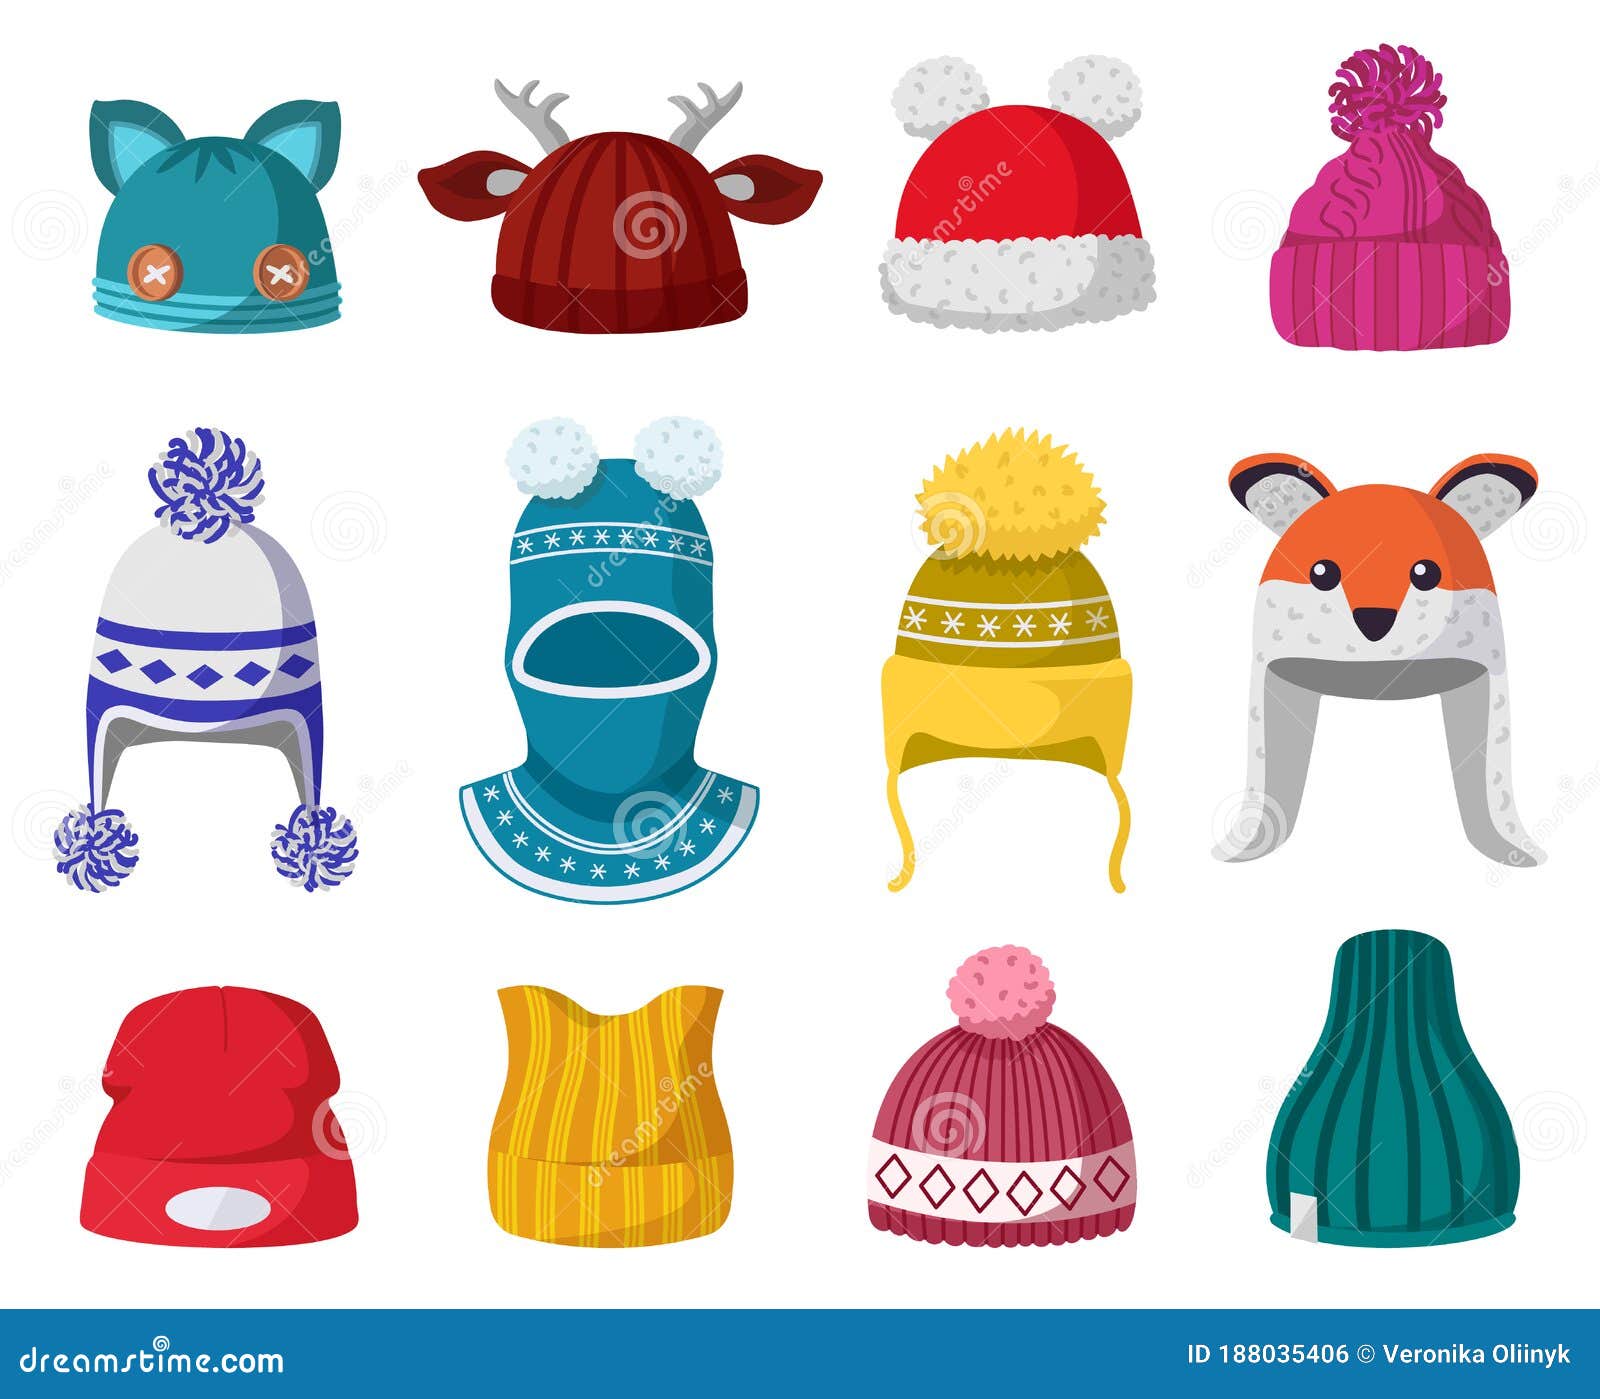 knitted winter hats. kids knit warm headwear, autumn and winter accessories    icons set